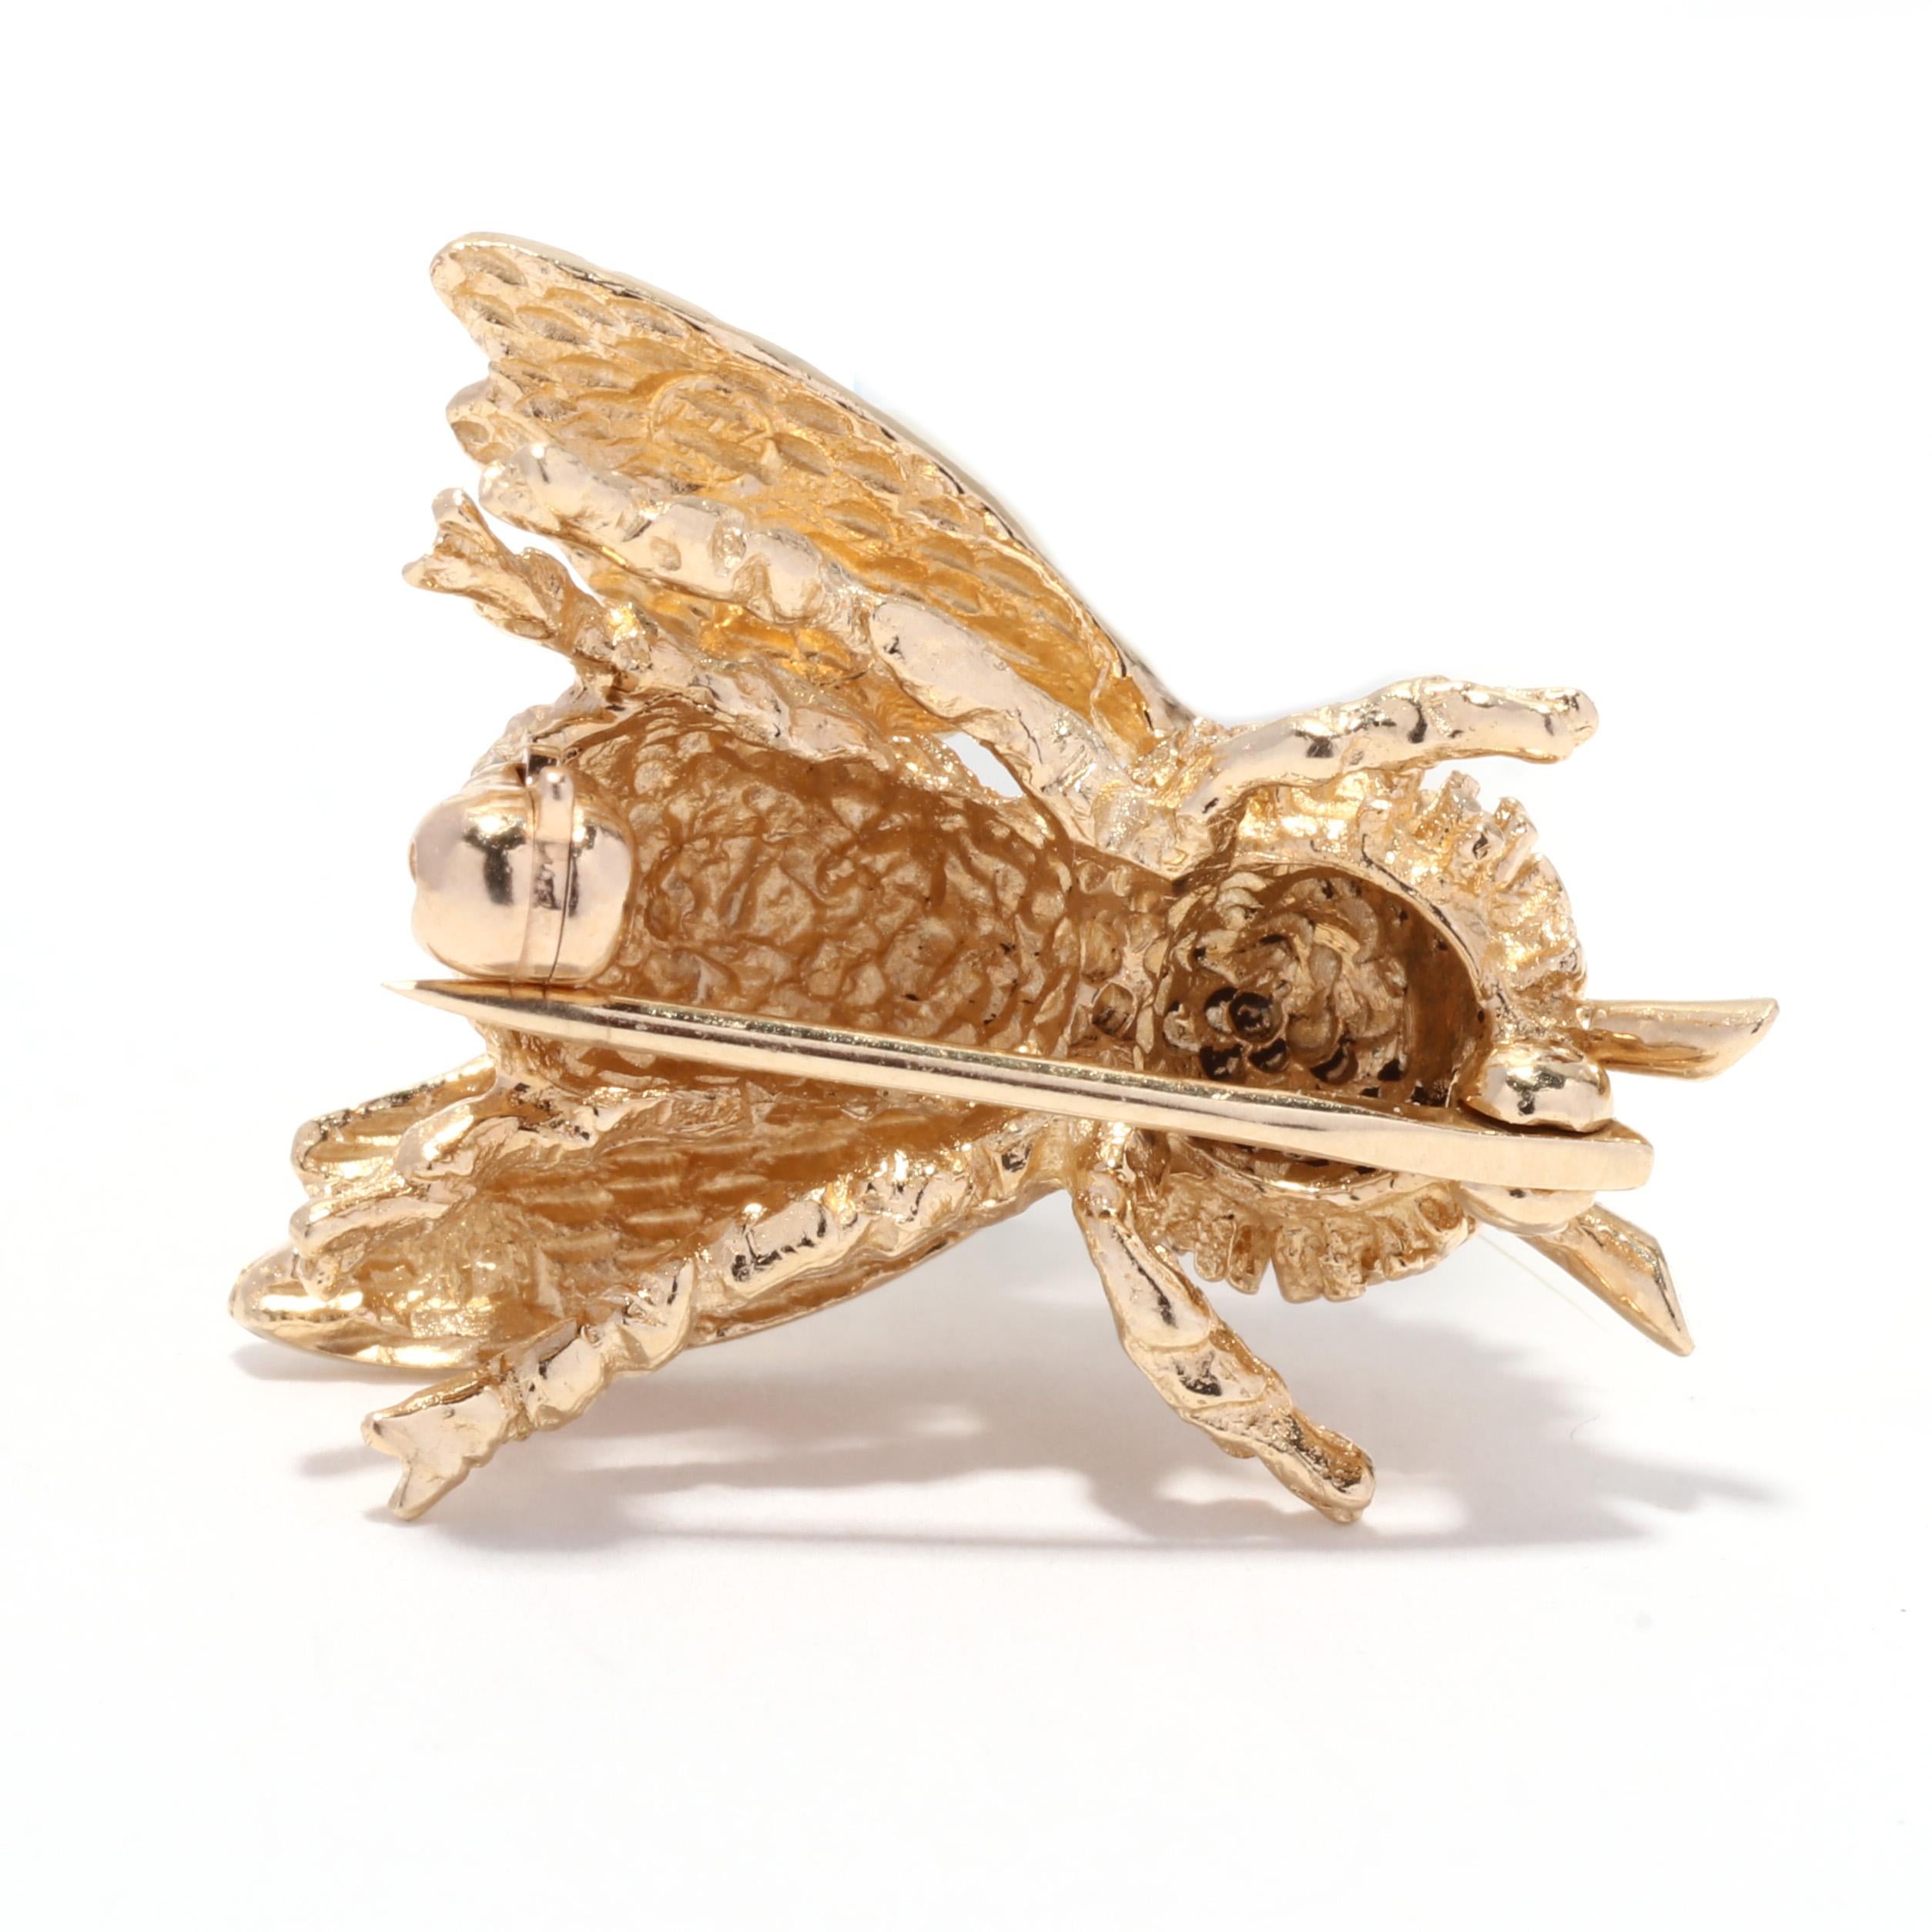 A vintage 14 karat yellow gold bumble bee brooch. This small gold brooch features a bumble bee motif with stippled and textured detailing, with a pin stem clasp.

Length: 3/4 in.

Width: 5/8 in.

Weight: 2.9 dwts. / 4.5 grams

Metal: 14KT